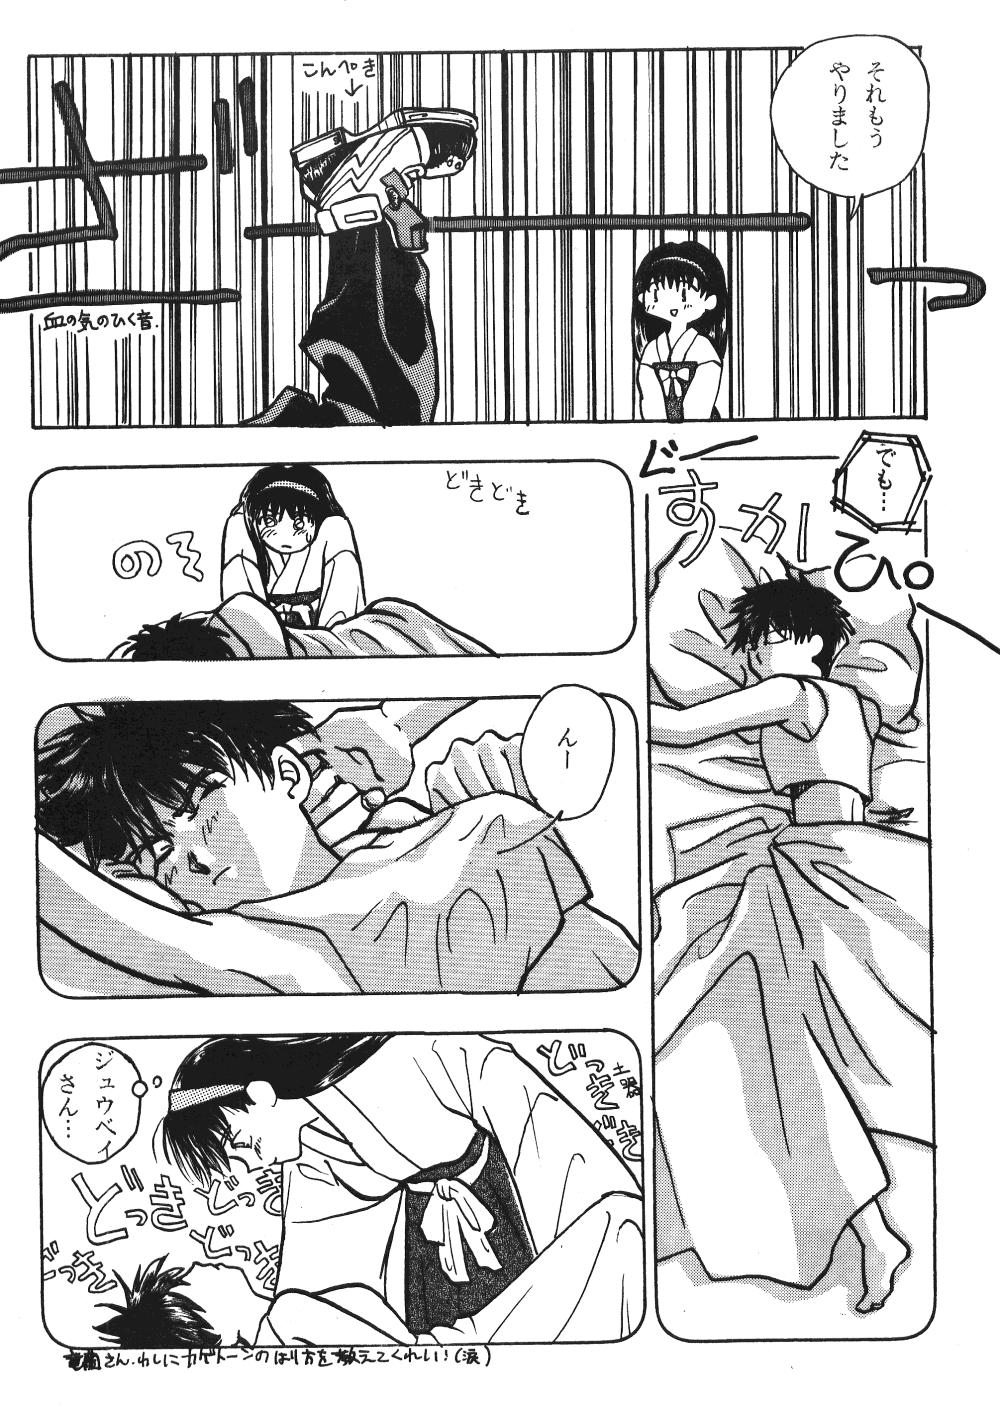 Best Blowjob Seinen Sunday - Street fighter Ranma 12 Ghost sweeper mikami White Chick - Page 11